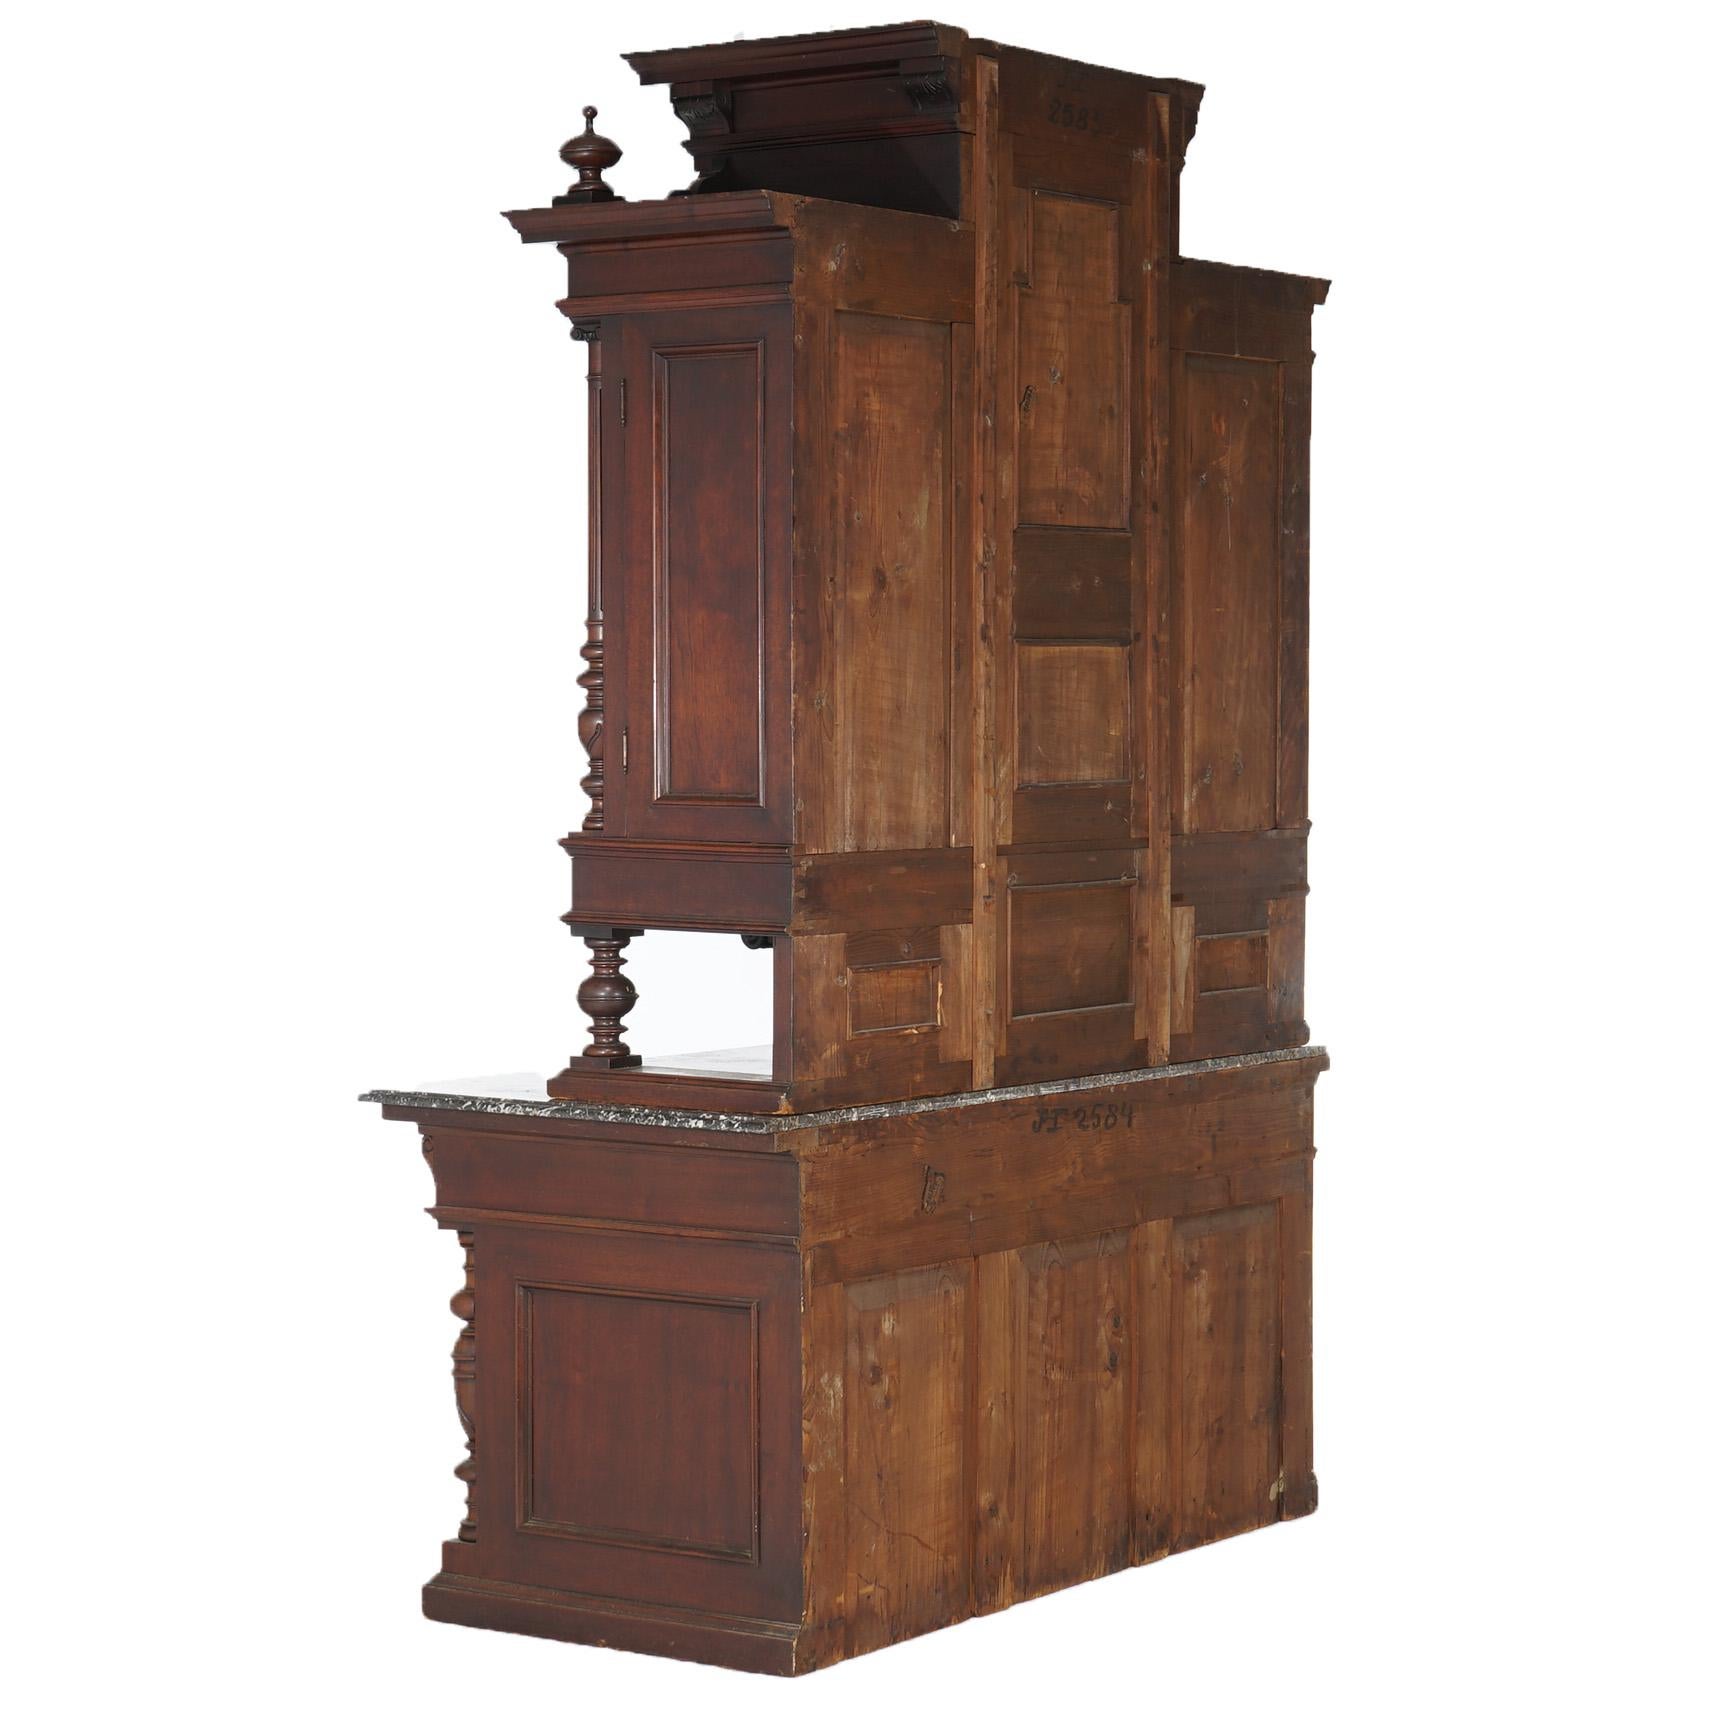 Antique French Renaissance Revival Carved Walnut Marble Top Court Cupboard C1890 12